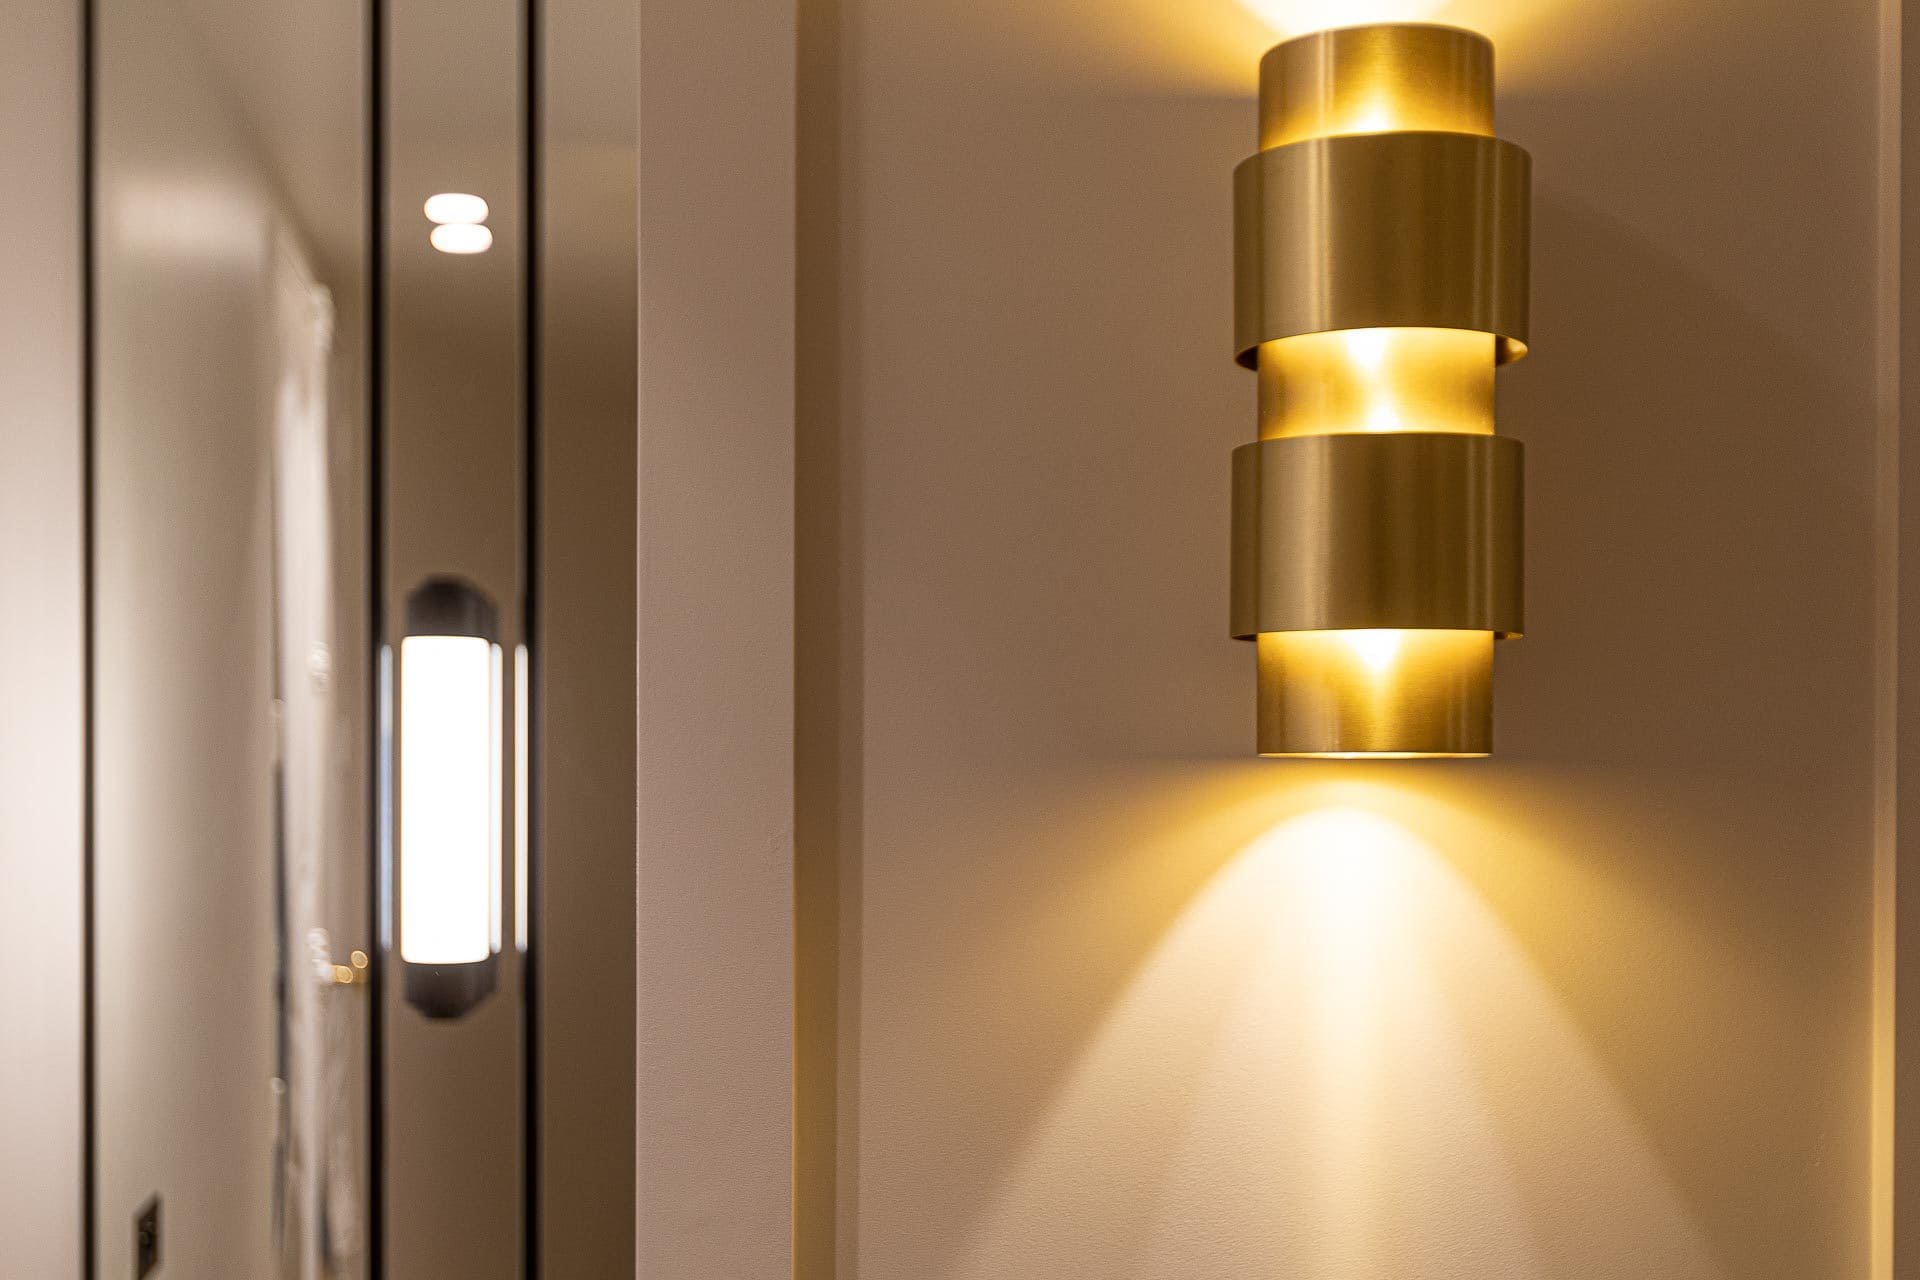 Design of wall lamp in a luxury apartment